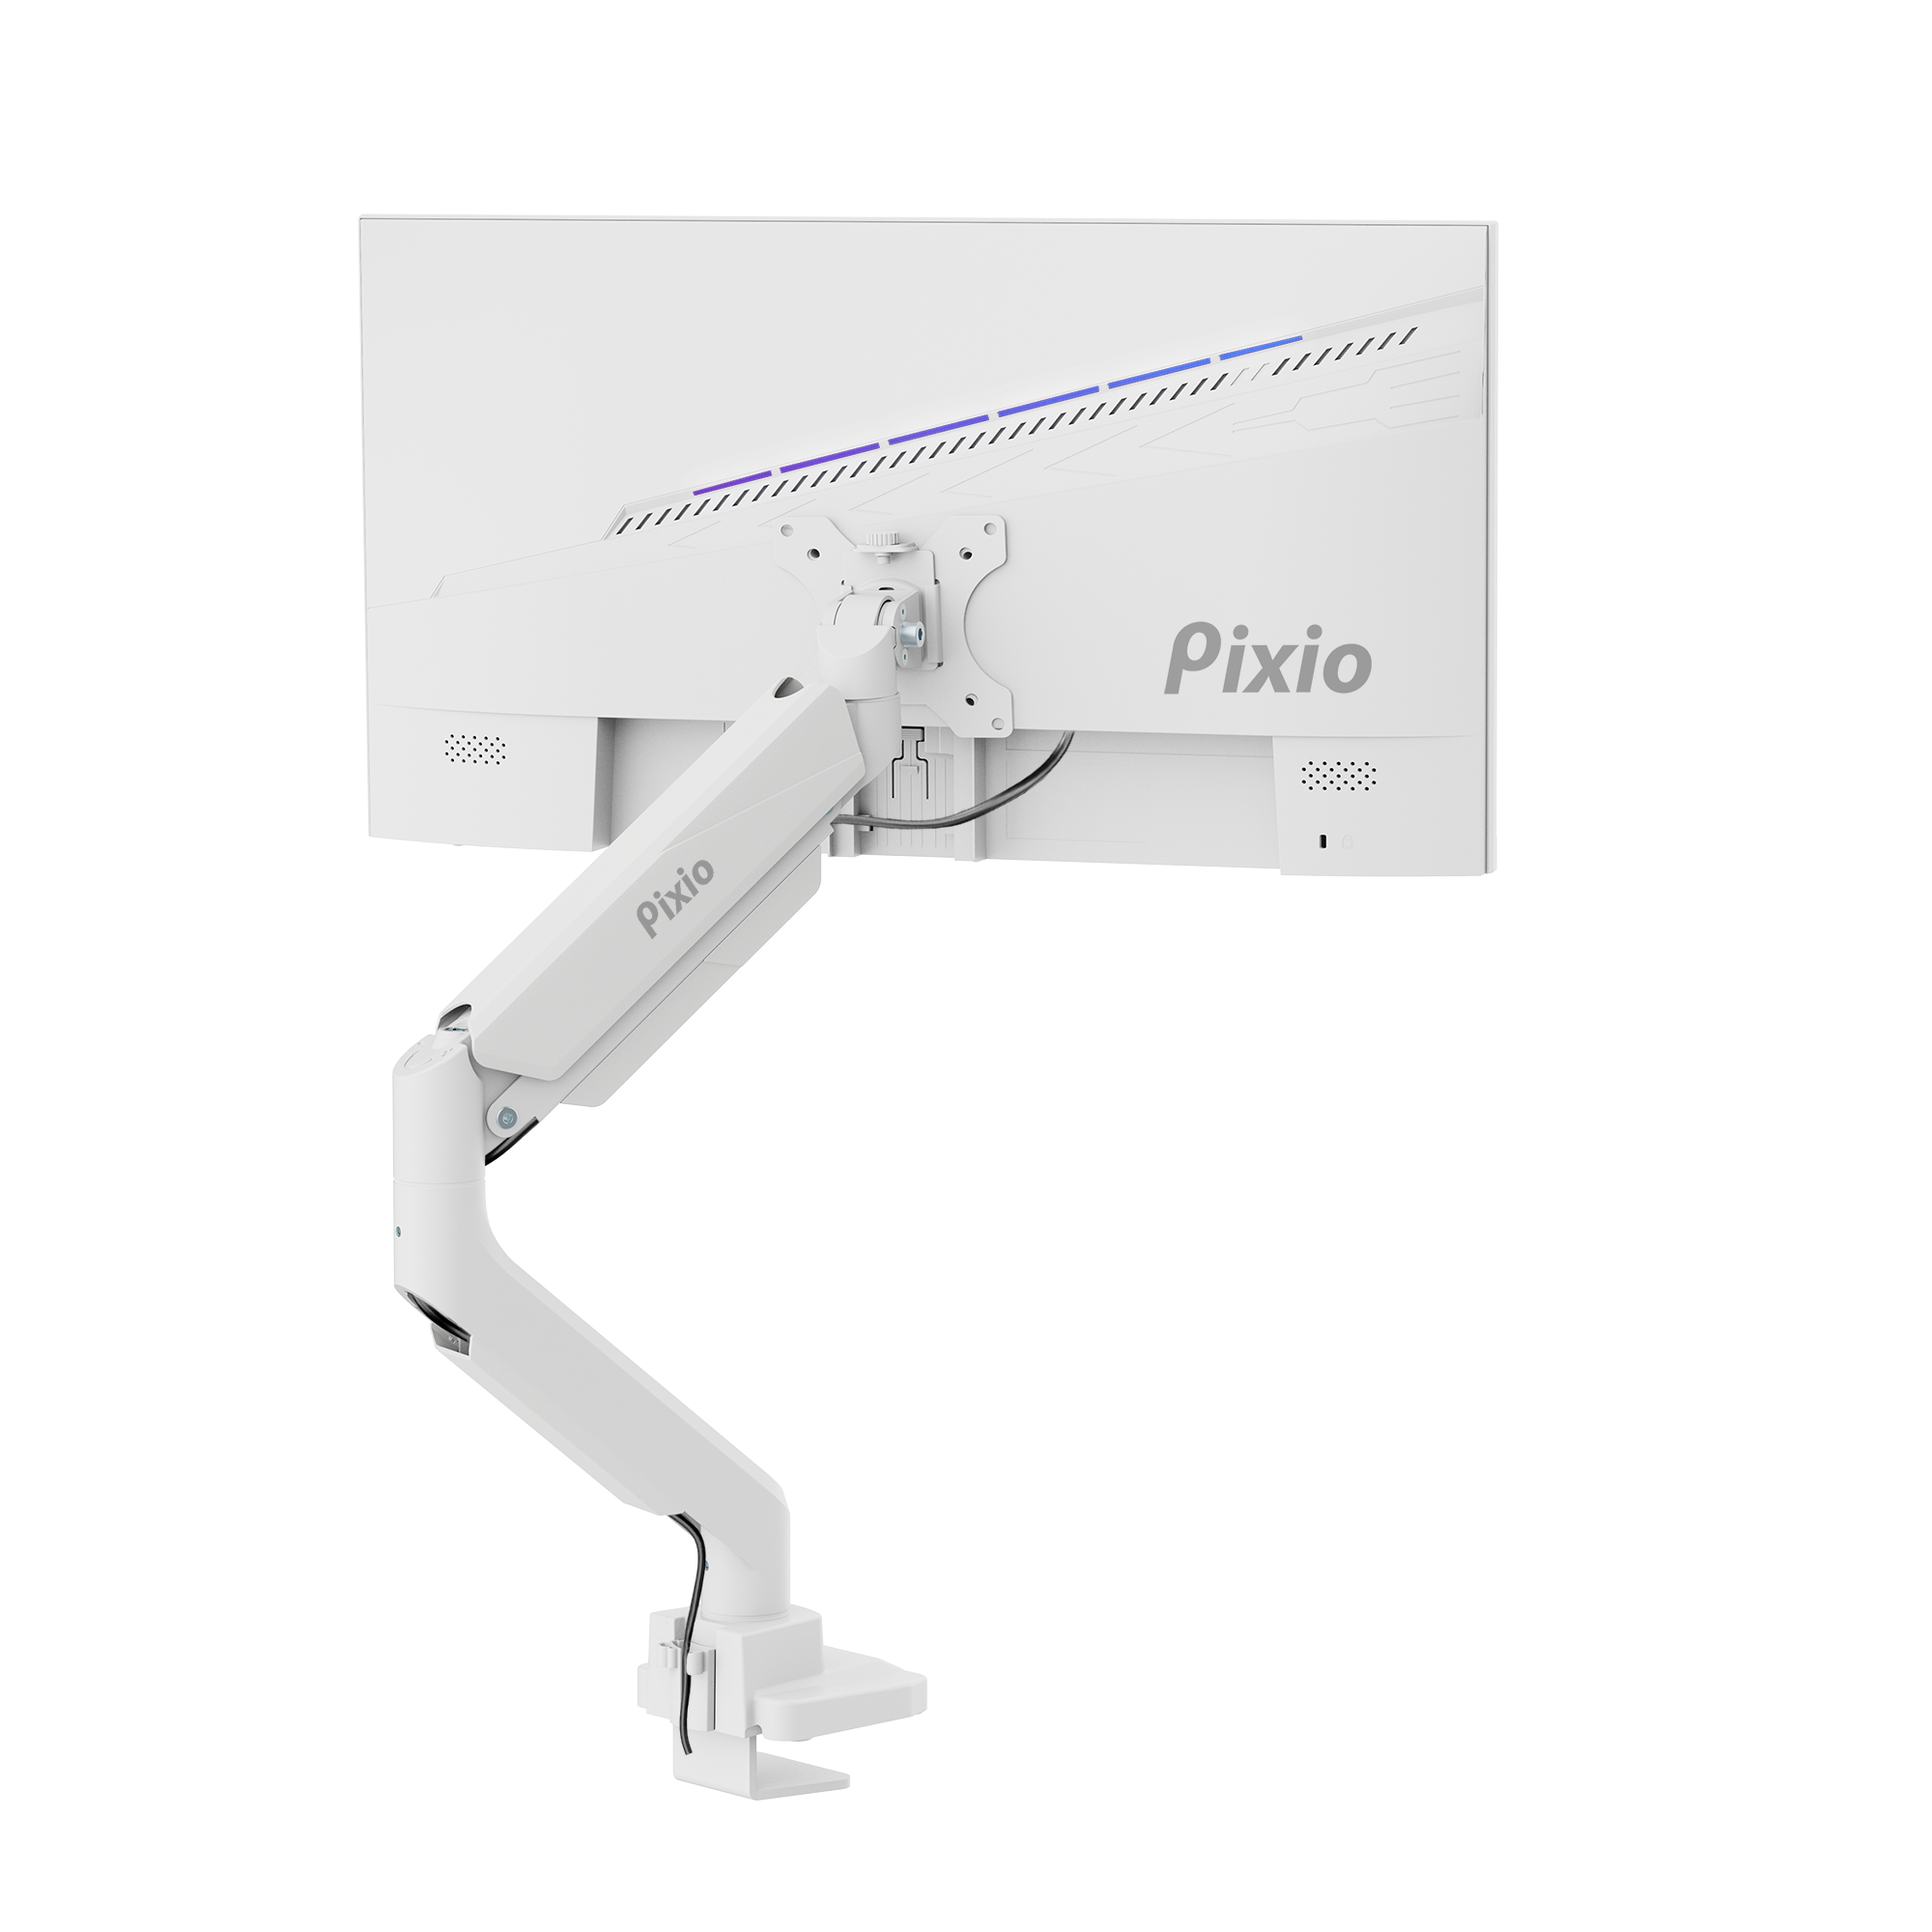 PS2S White Heavy-Duty Single Monitor Arm Mount - Certified Refurbished